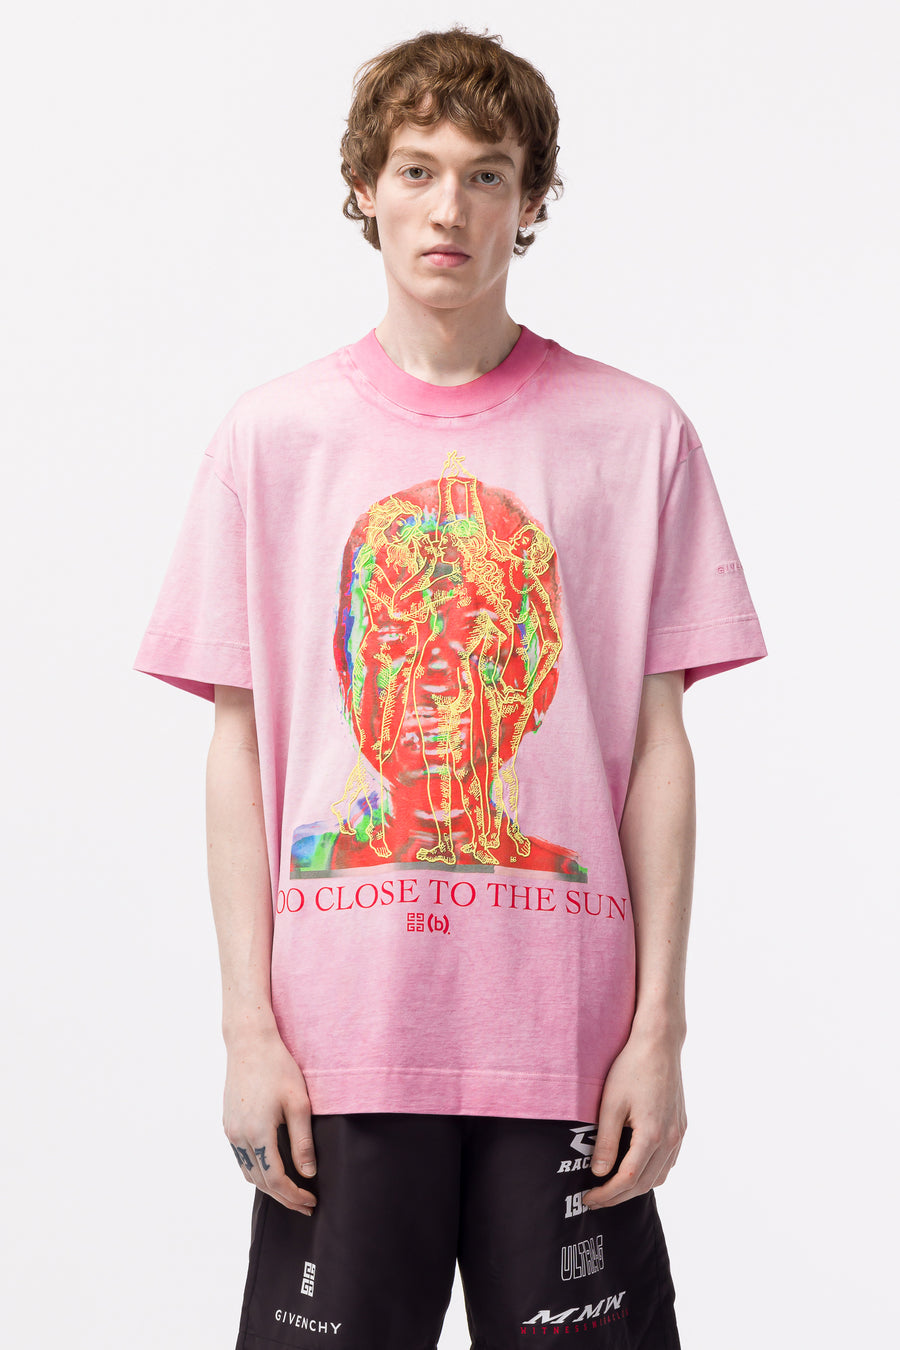 Givenchy - Men's Oversized T-Shirt in Bright Pink